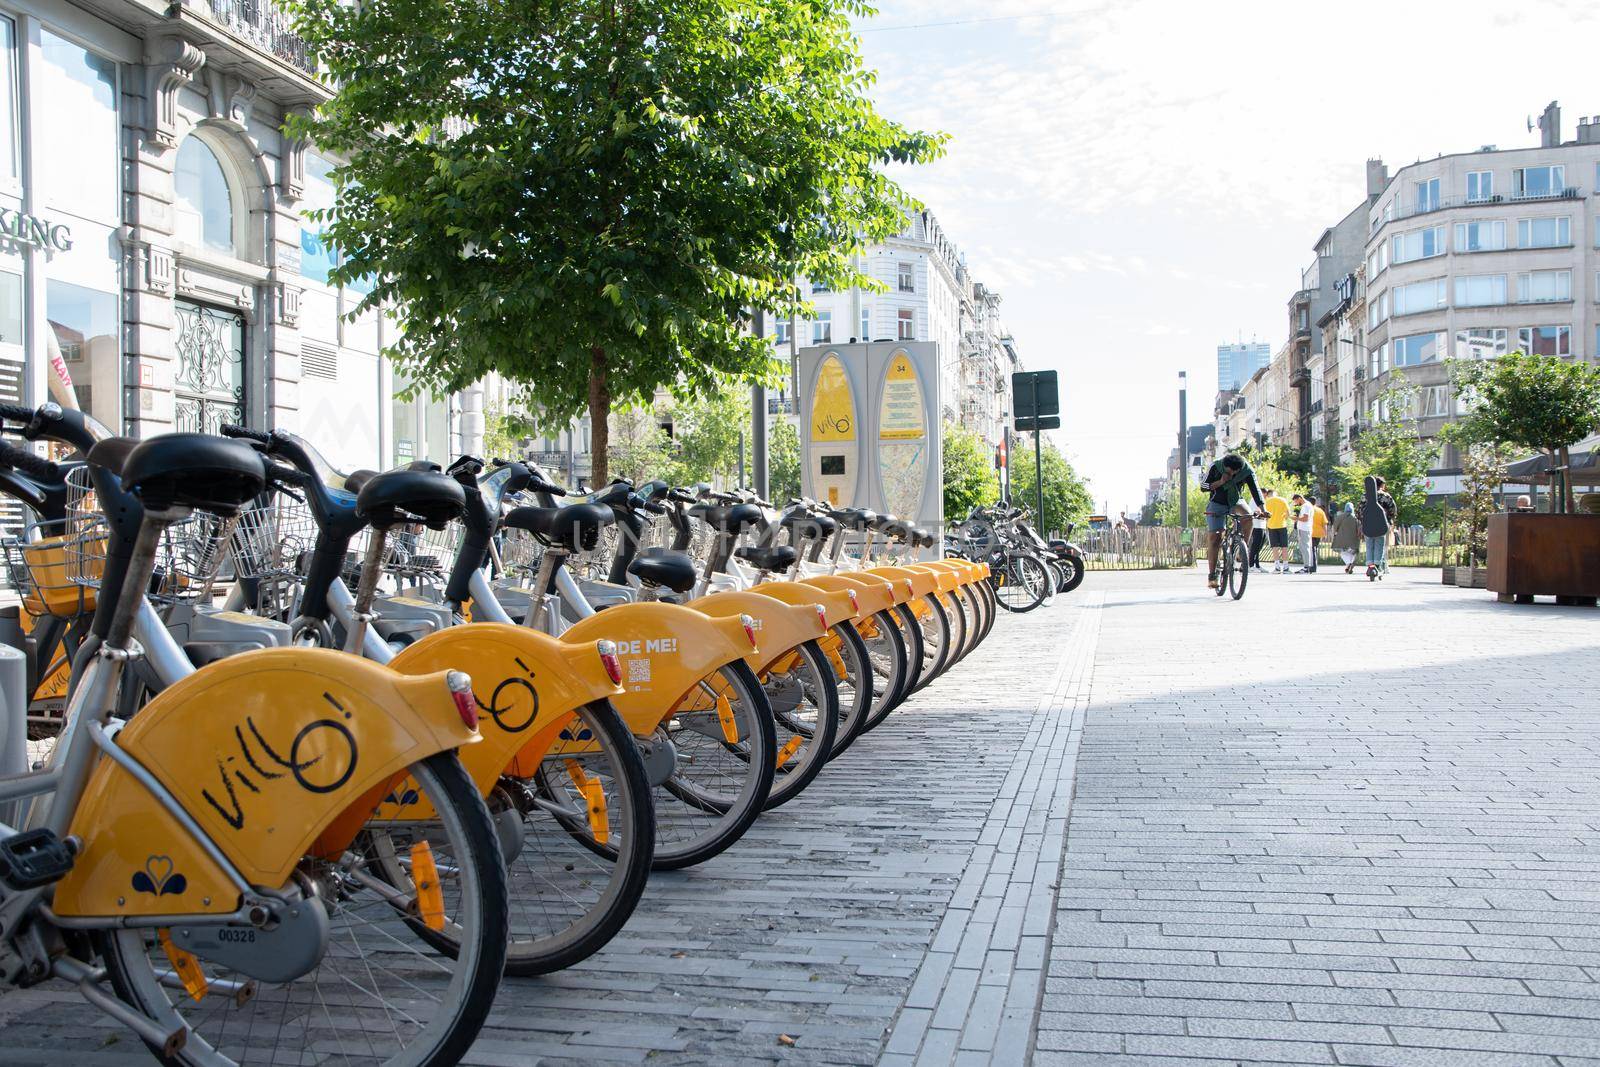 BRUSSELS,BELGIUM - June 02, 2022: public Villo bicycles parked in the sharing by KaterinaDalemans